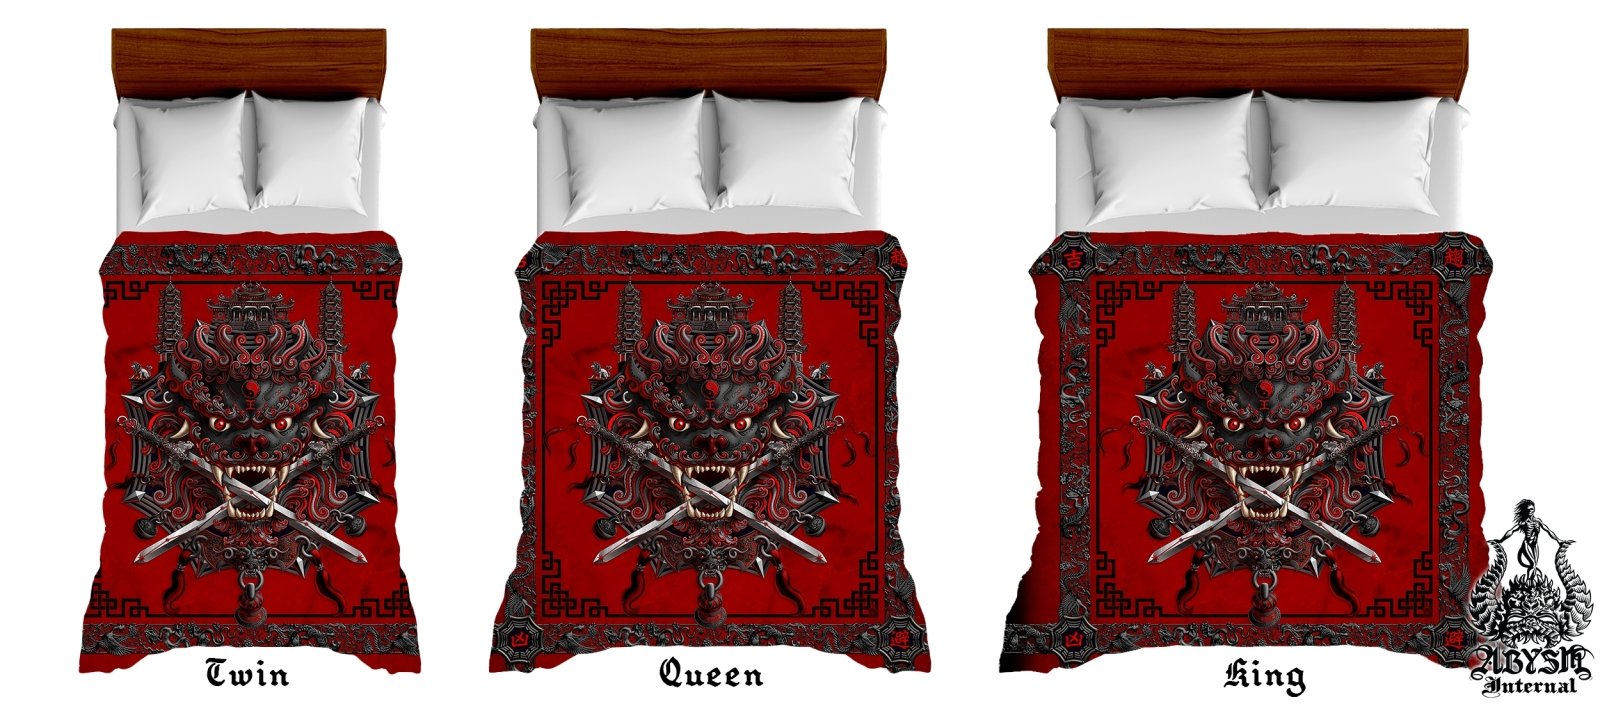 Asian Lion Bedding Set, Comforter and Duvet, Taiwan Sword Lion, Chinese Bed Cover, Gamer Bedroom, Alternative Decor, King, Queen and Twin Size - Bloody Gothic - Abysm Internal